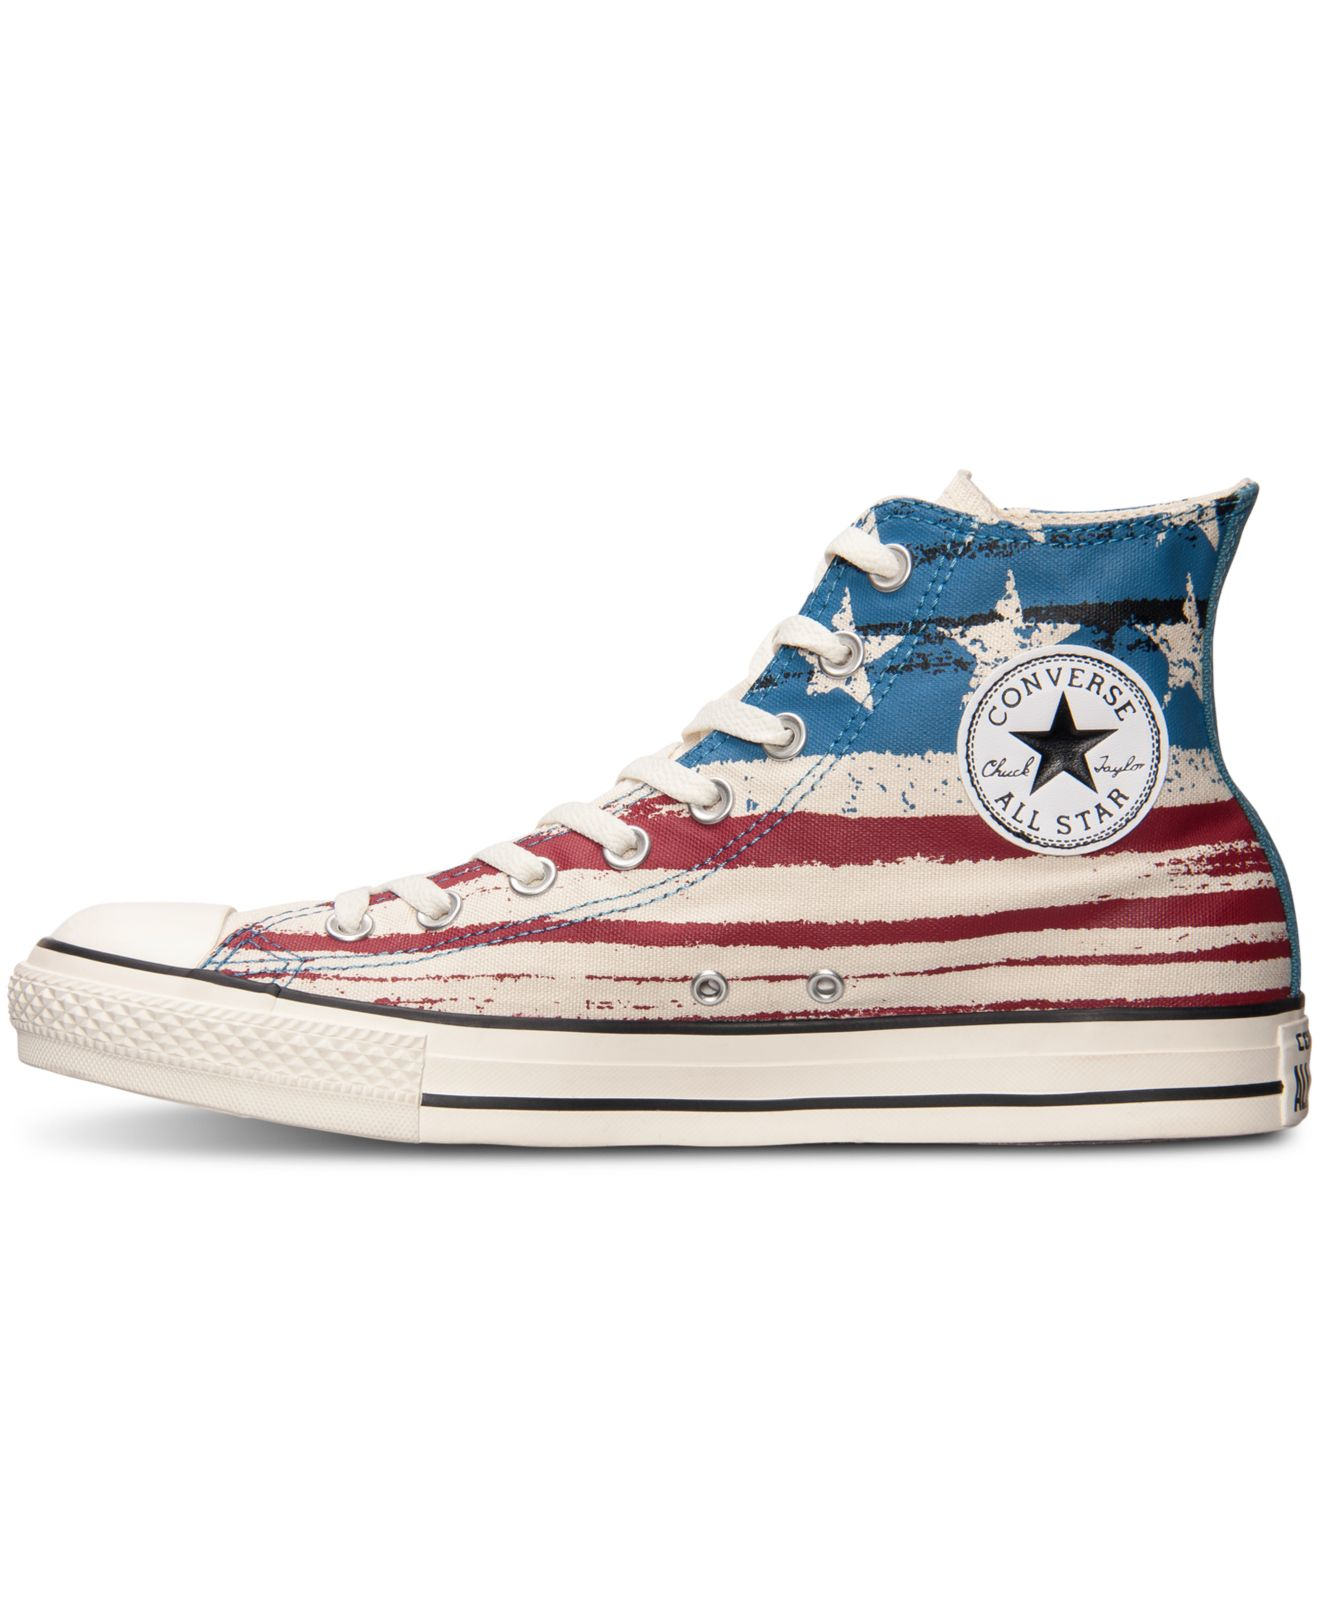 Lyst - Converse Men's Chuck Taylor High Usa Flag Print Casual Sneakers ...